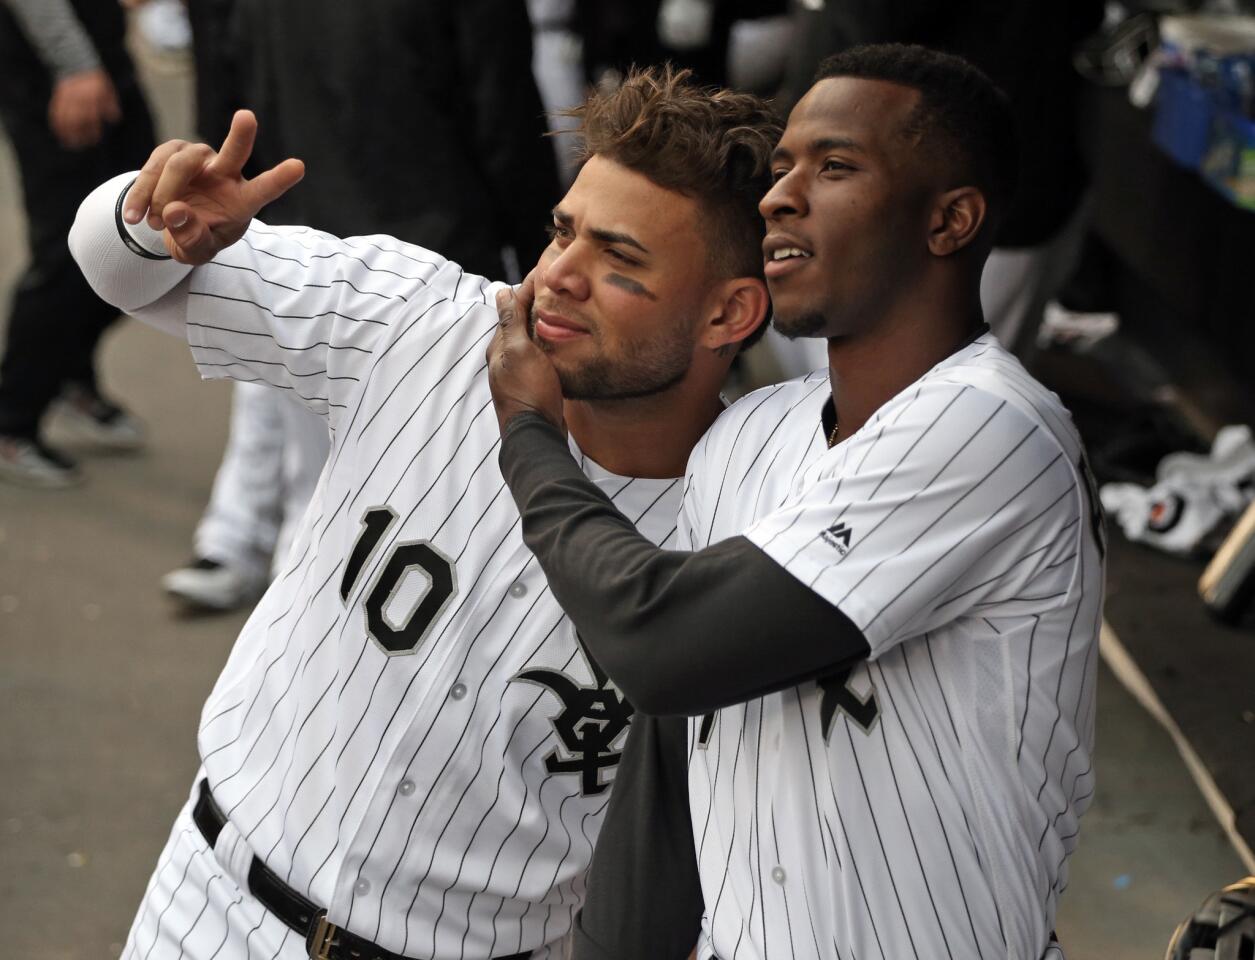 White Sox second baseman Yoan Moncada, left, and shortstop Tim Anderson mug for the video board camera before the start of a game against the Rangers at Guaranteed Rate Field on Saturday, May 19, 2018.